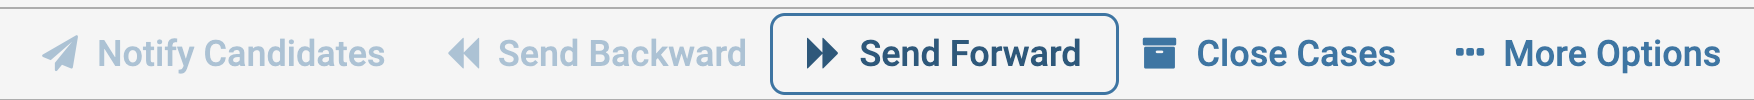 Send Forward button selected in between send backward and close cases